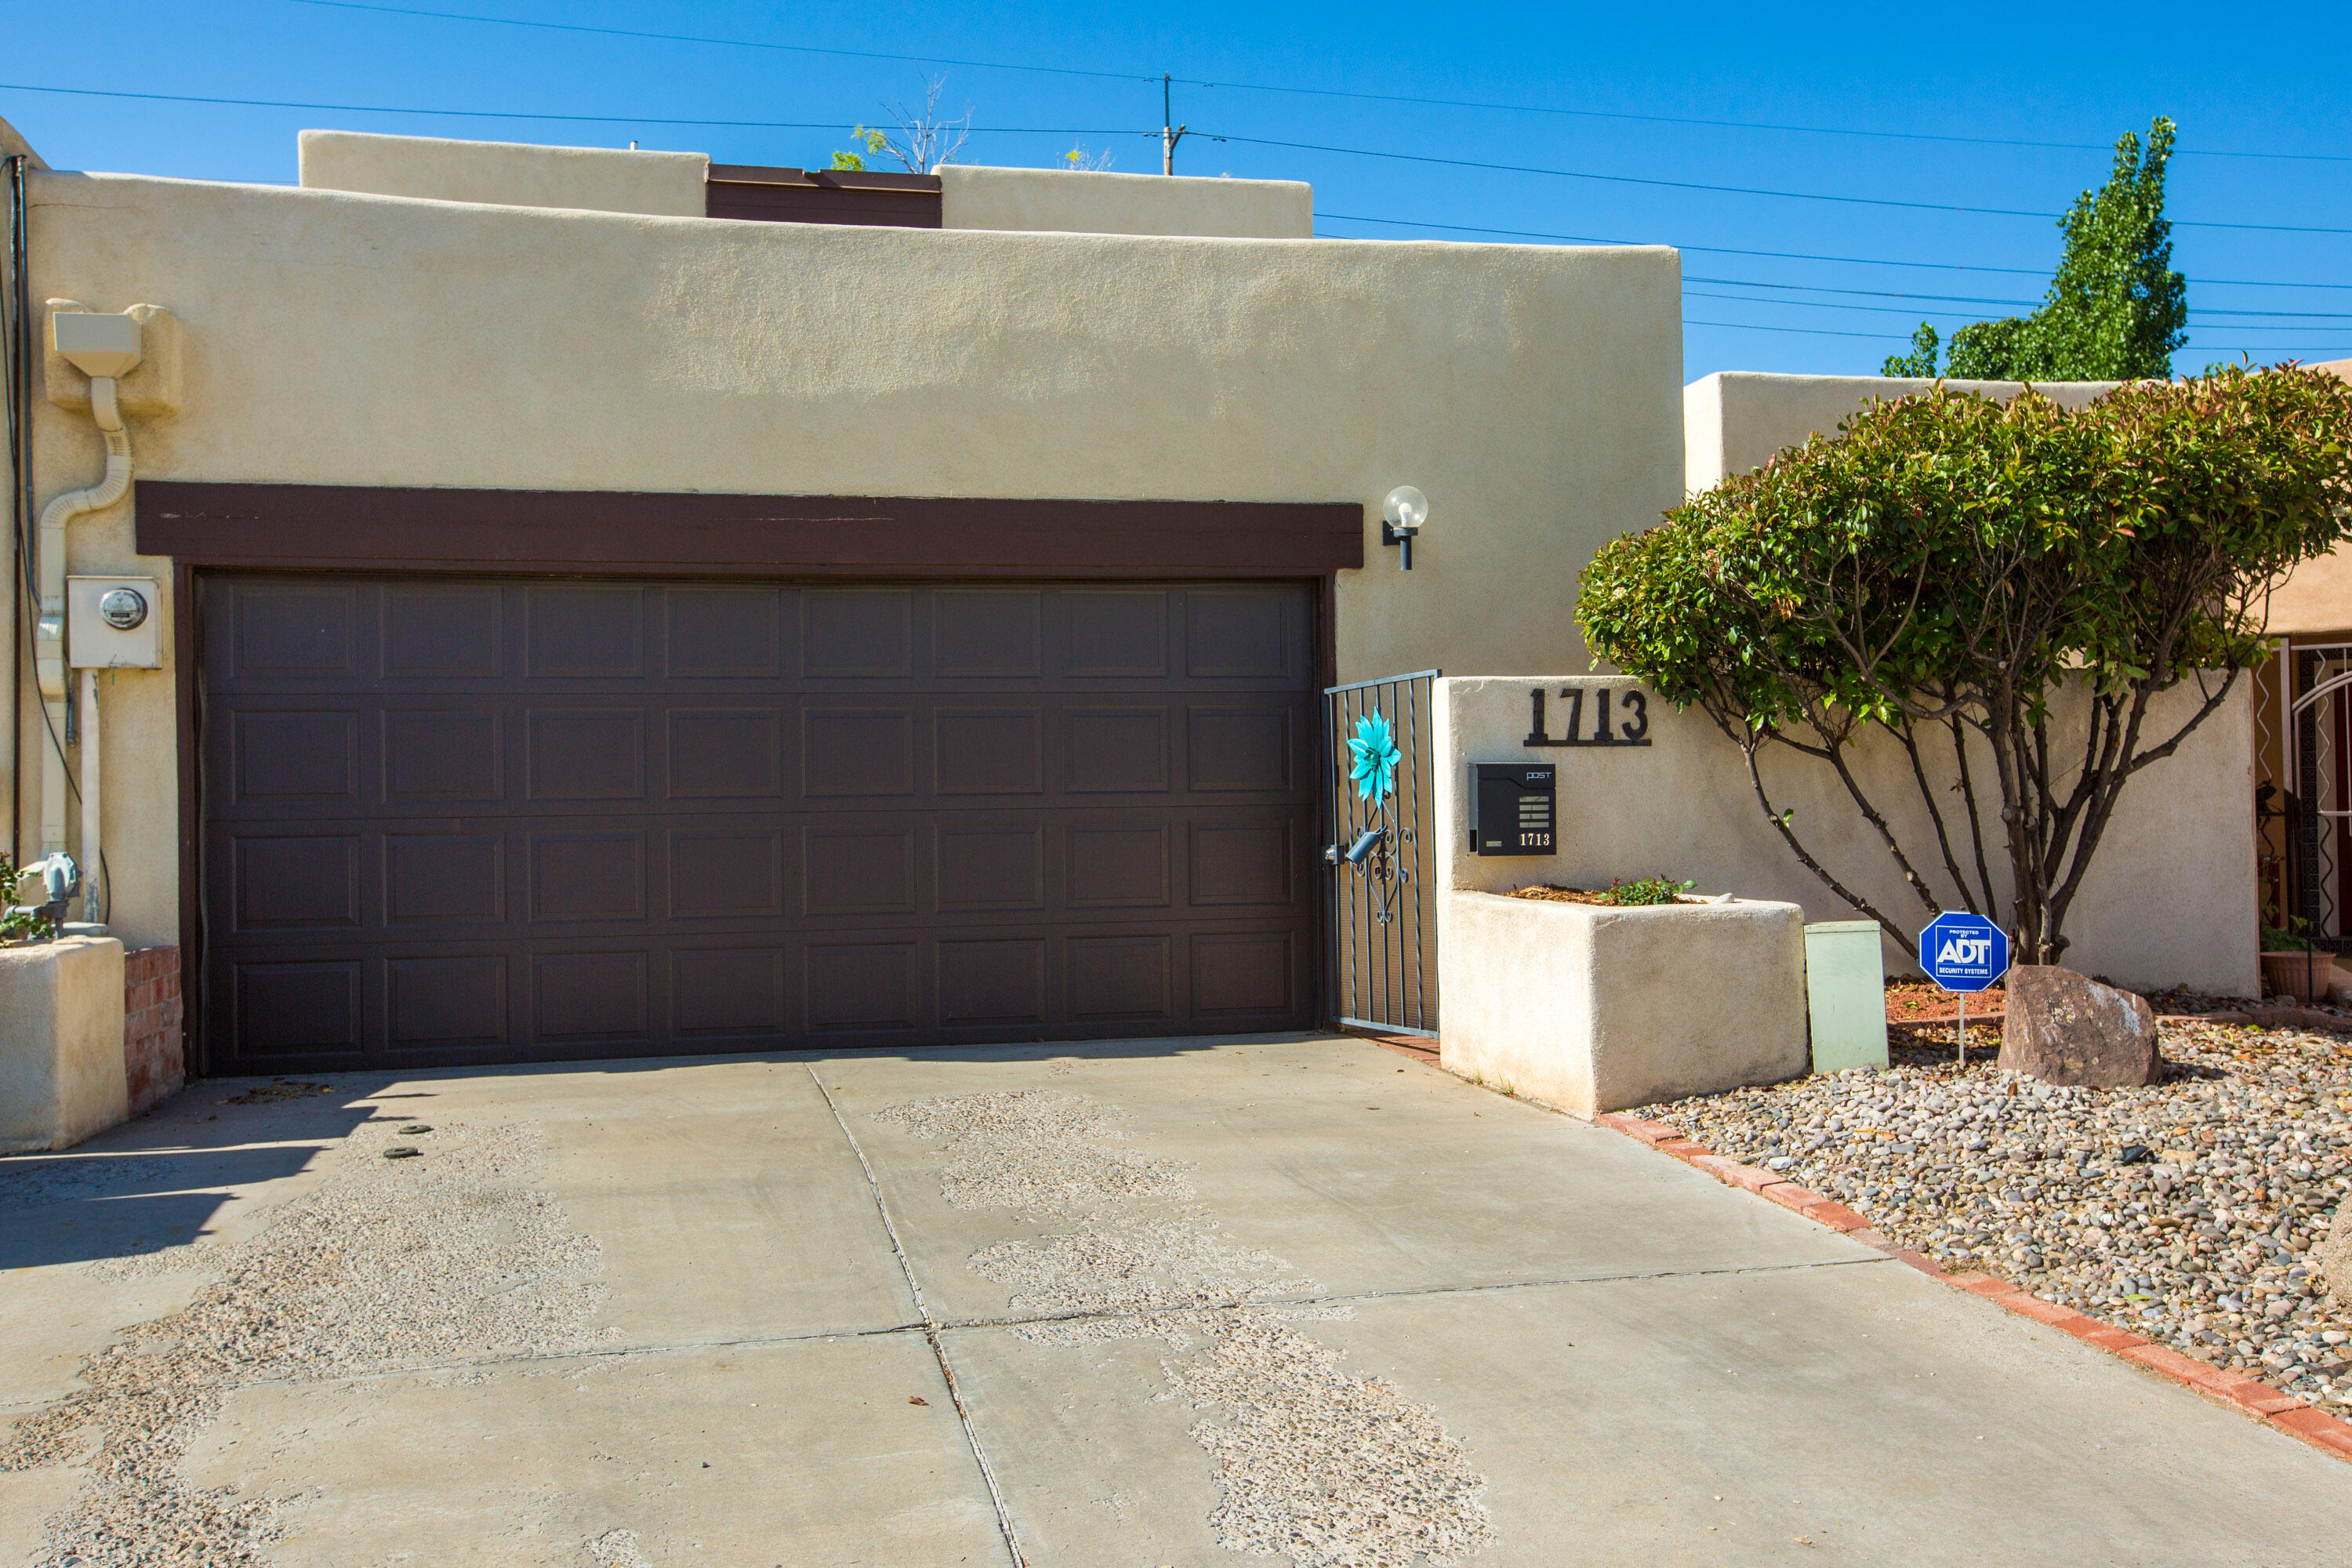 This incredible townhome is located in the highly desirable north UNM area and is convenient to the I40 corridor, UNM parks, restaurants, shopping and the new Whole Foods complex at Indian School/Carlisle. The home has been thoughtfully updated throughout, including a kitchen refresh with s/s appliances, granite counters, glass tile backsplash and freshly painted cabinetry. Spacious living/dining area w/ newly updated fireplace, mantle and wet bar. The primary bedroom features a sitting/office area, en suite bath with soft close barn doors, walk in closet and deck with beautiful views. Smart home features throughout! Enjoy the newly landscaped backyard from the covered patio. Two car attached garage has a large  heated/cooled storage room and workshop area with a sink. Welcome home!